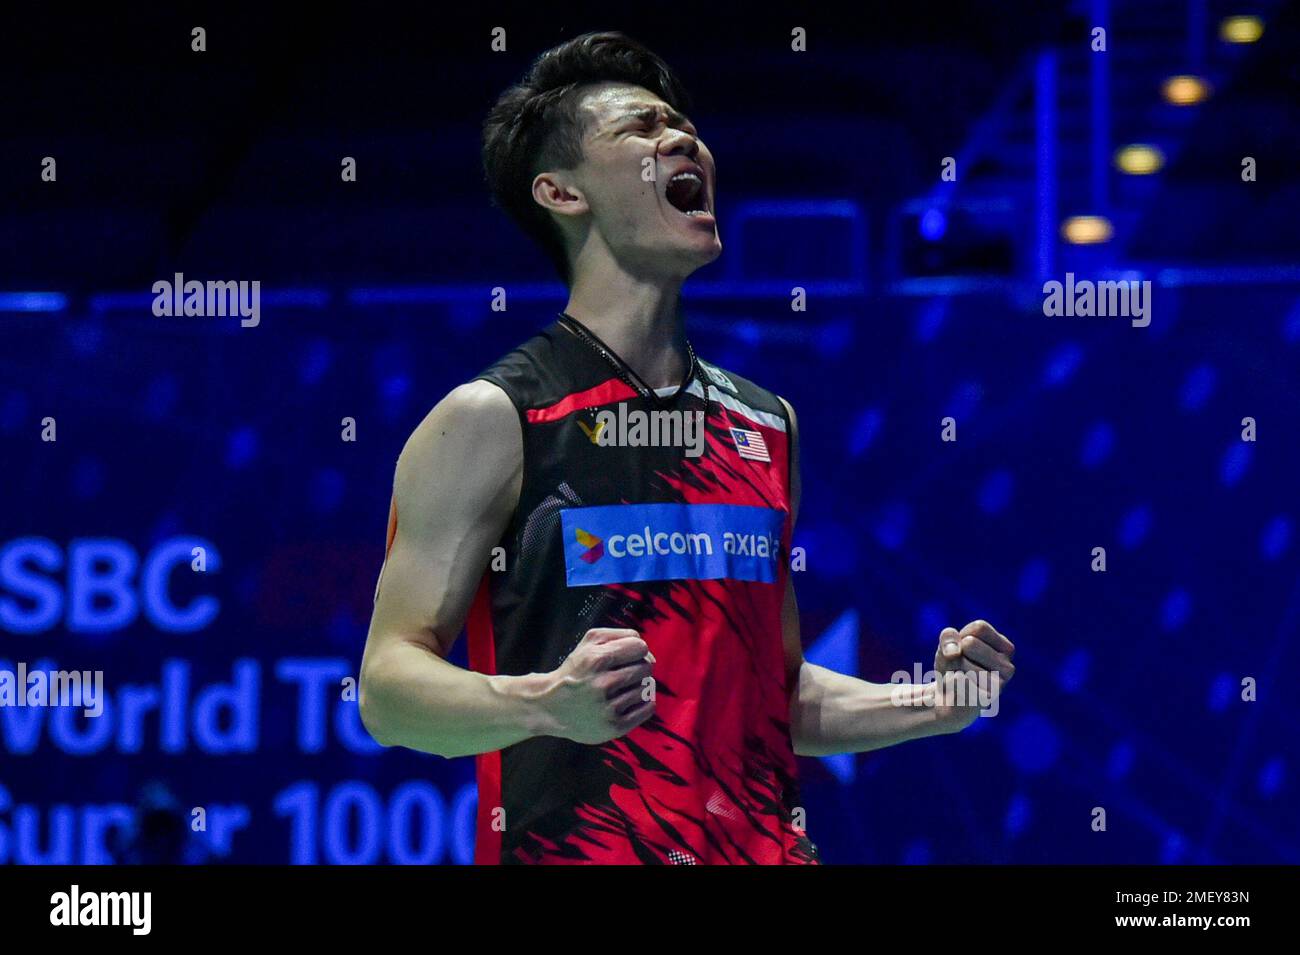 Malaysias Lee Zii Jia celebrates after winning Denmarks Victor Axelsen during the mens final match of the All England Open Badminton Championships at the Utilita Arena in Birmingham, England, Sunday March 21,